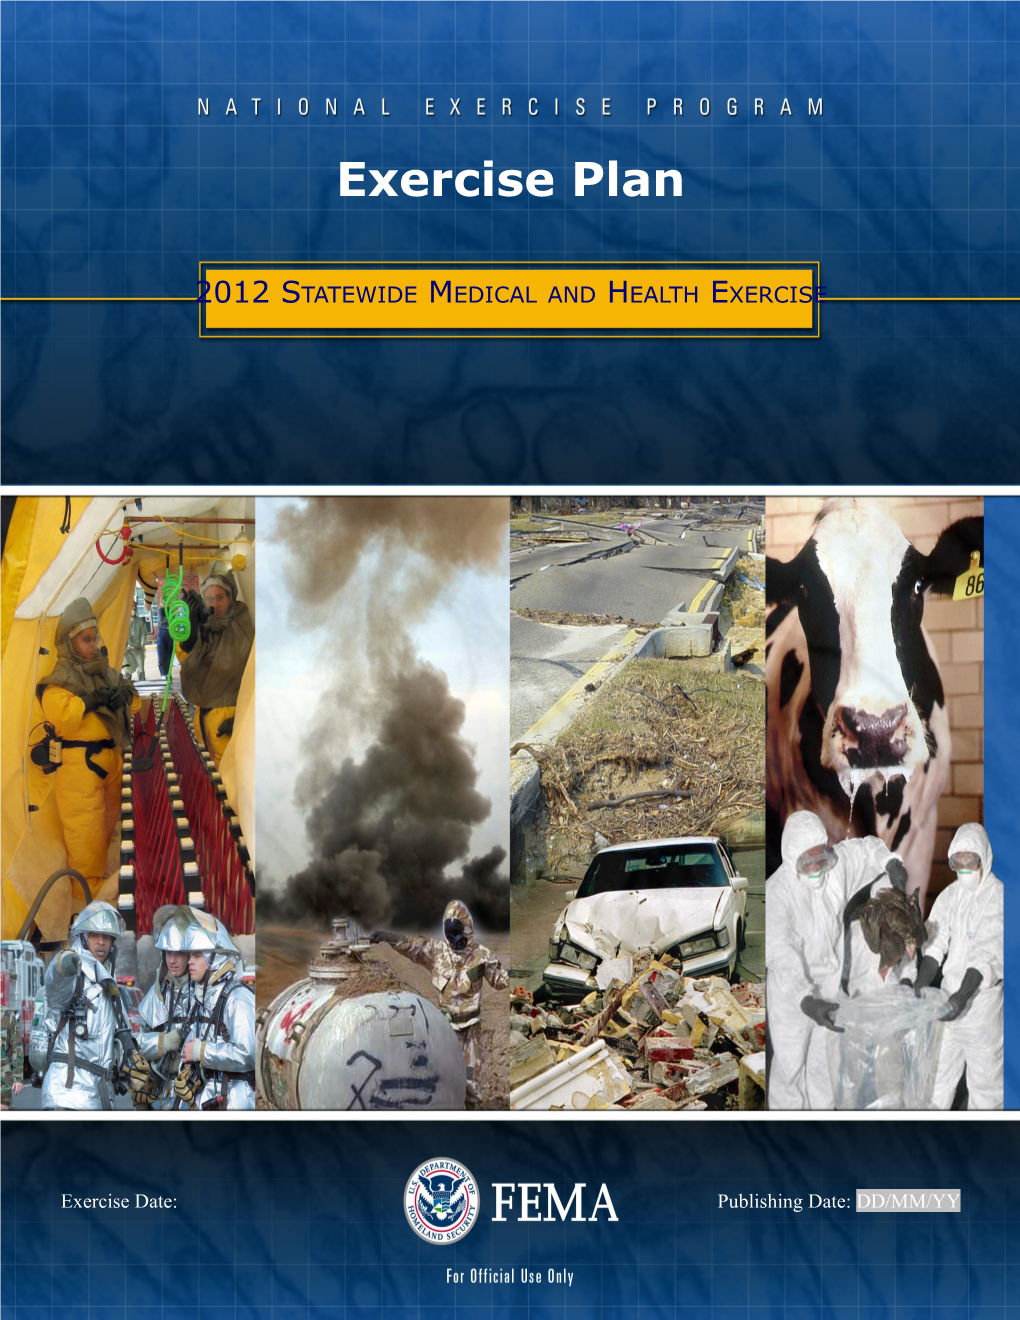 Exercise Plan 2012 Statewide Medical and Health Exercise